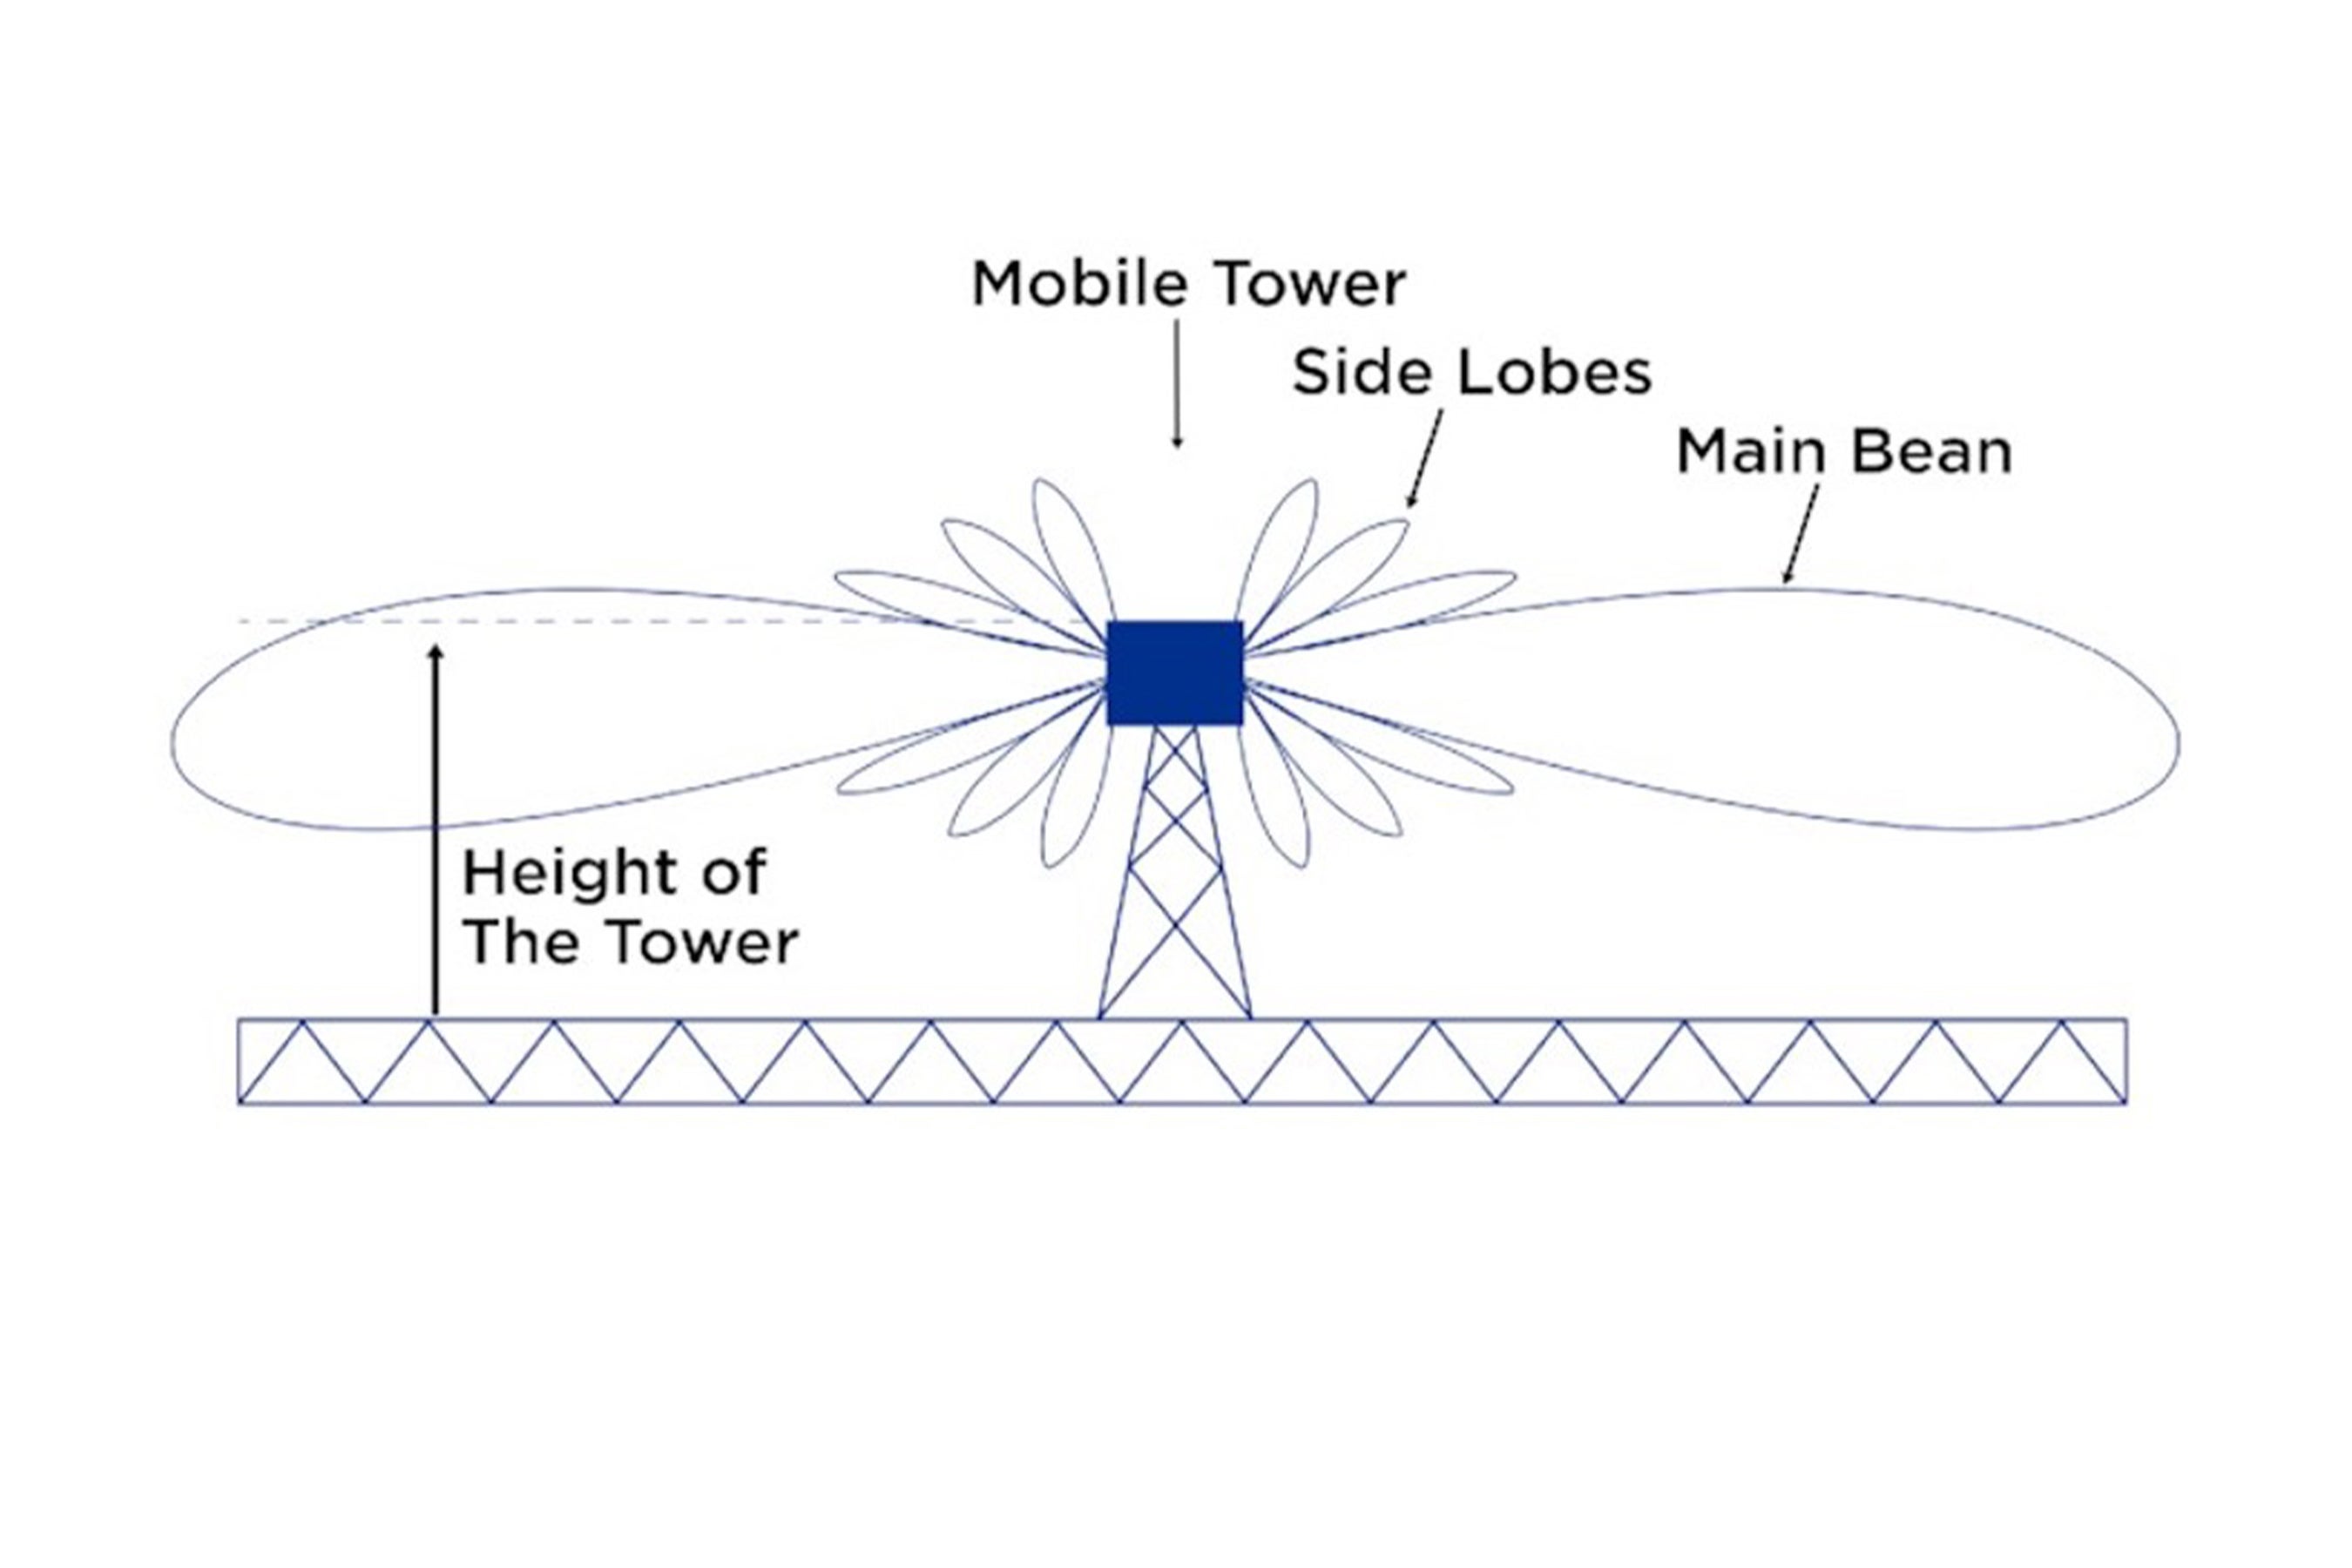 Graphic showing height, side lobes and main bean radiation pattern of a mobile tower antenna.